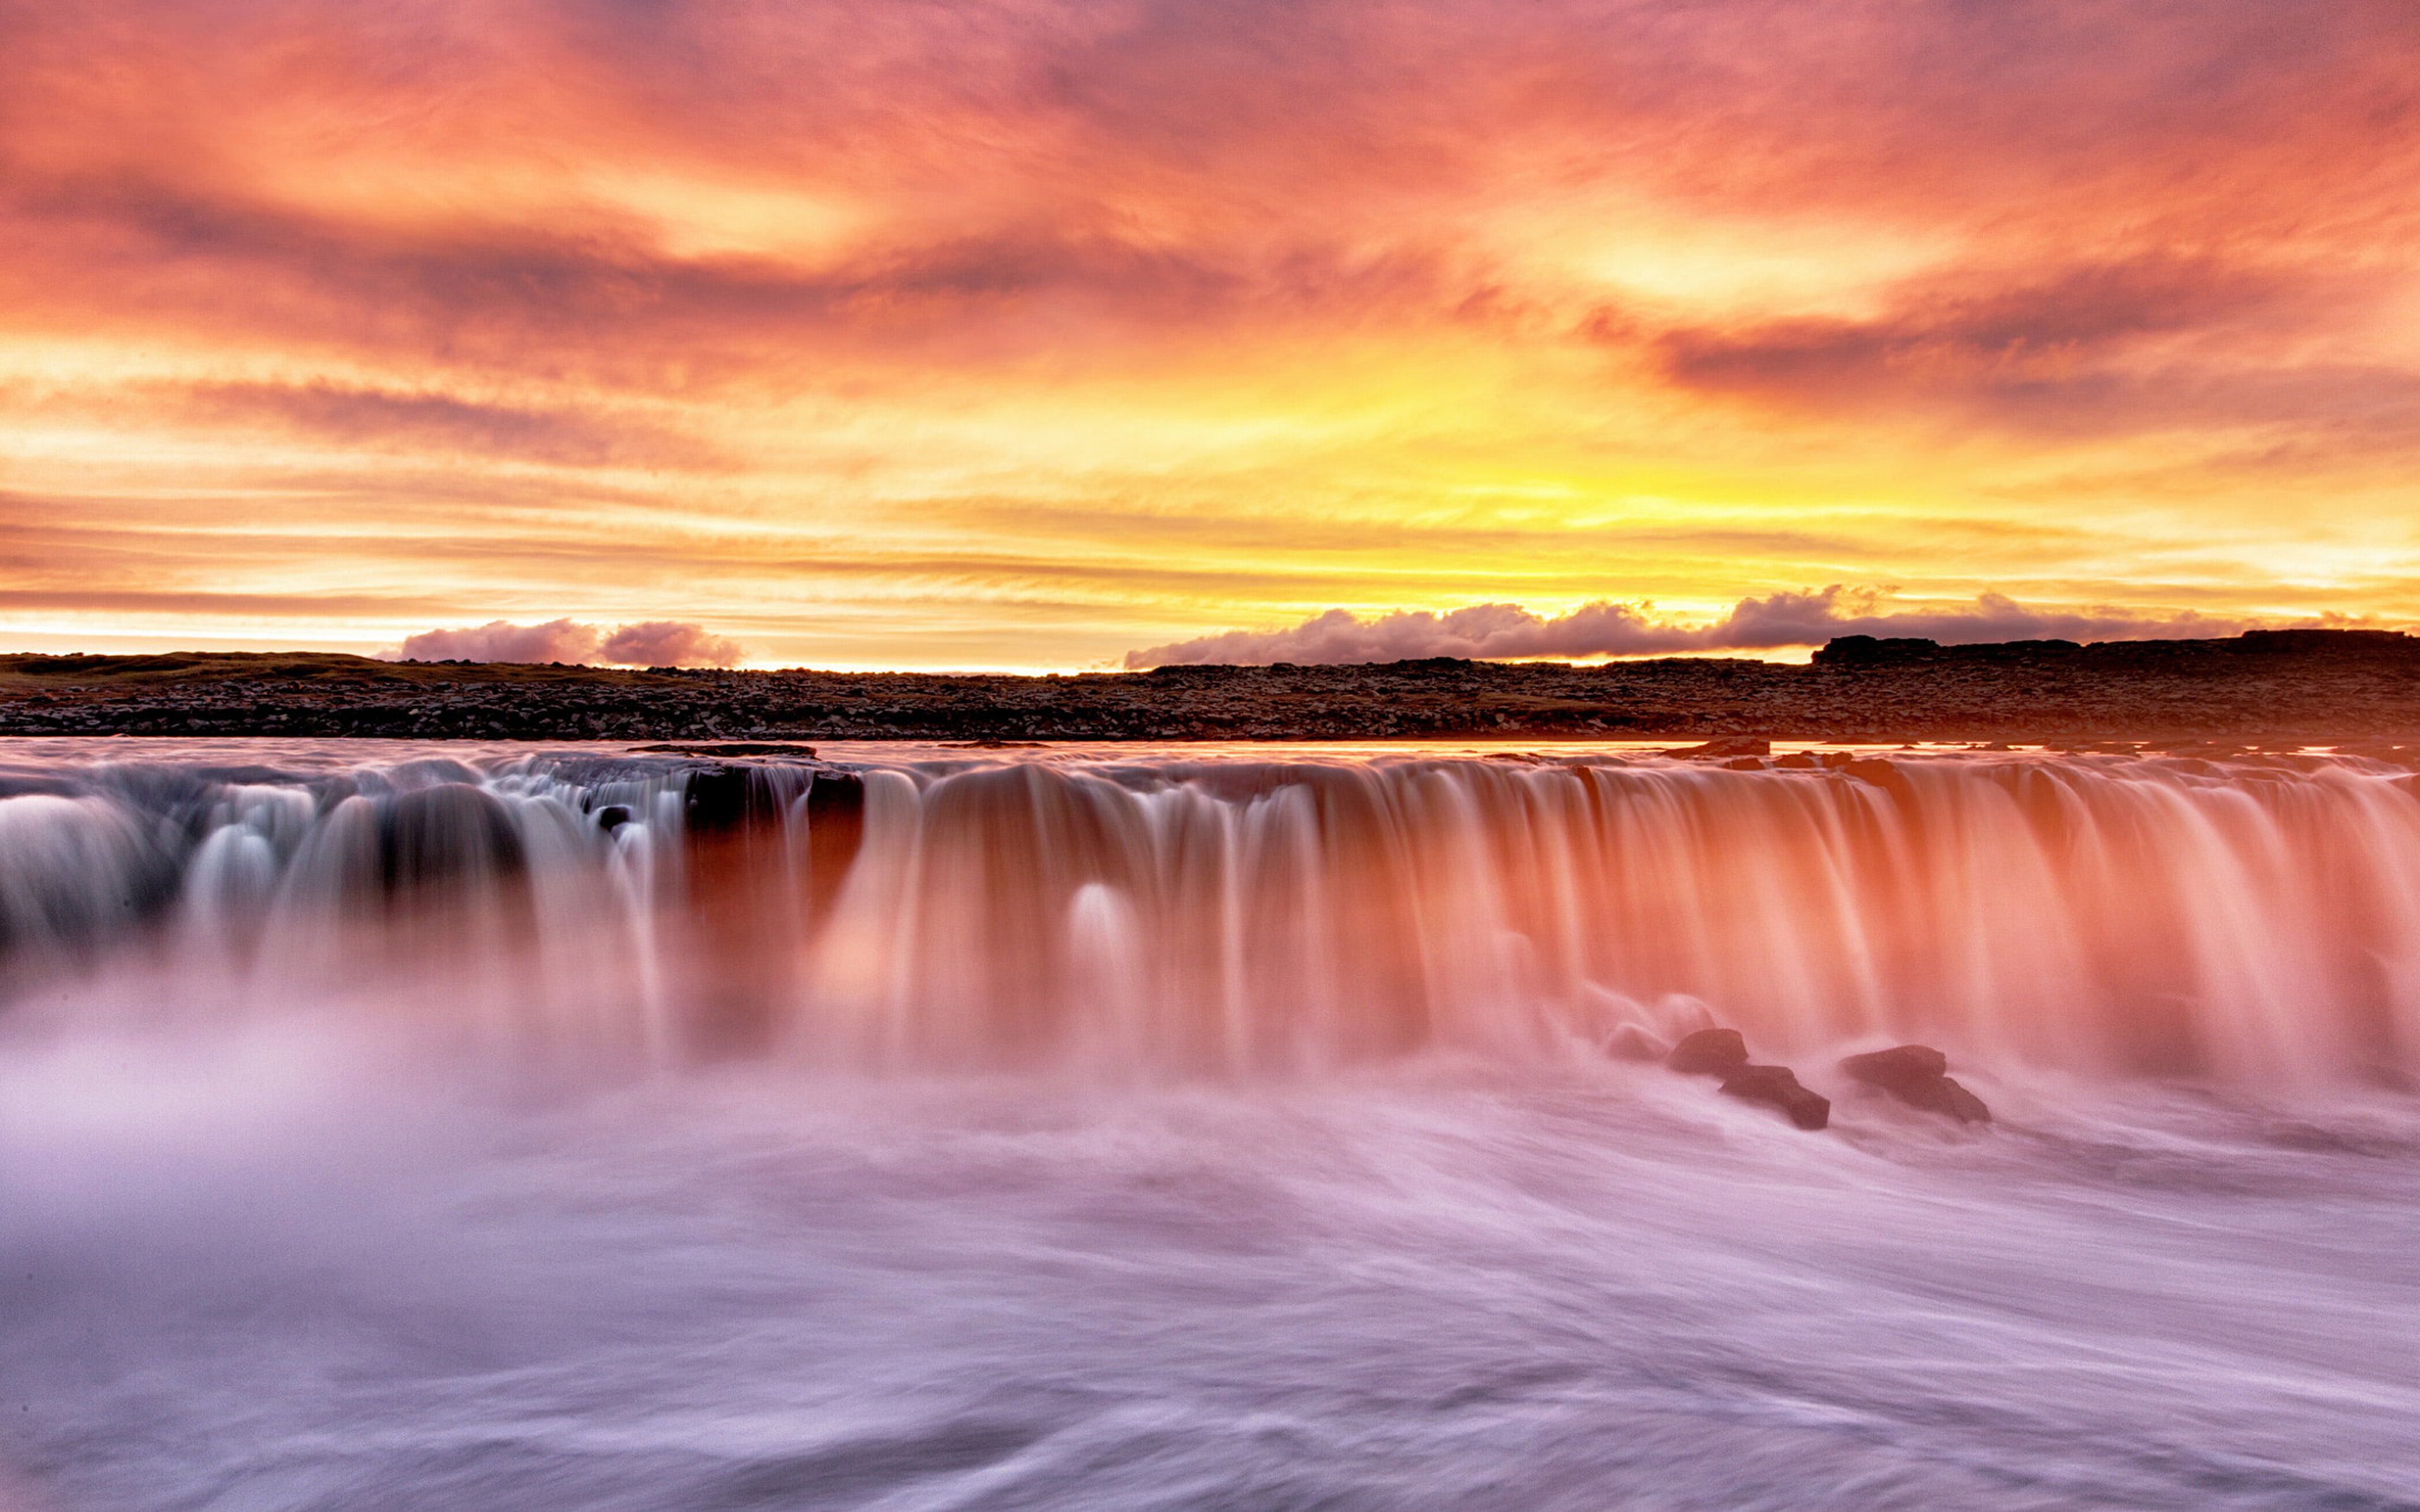 Selfoss Waterfall On The River Jökulsá á Fjöllum In The North Of Iceland 30 Km Long Arctic Sea Sunset Landscape Nature Wallpaper For Desktop 3840×2400